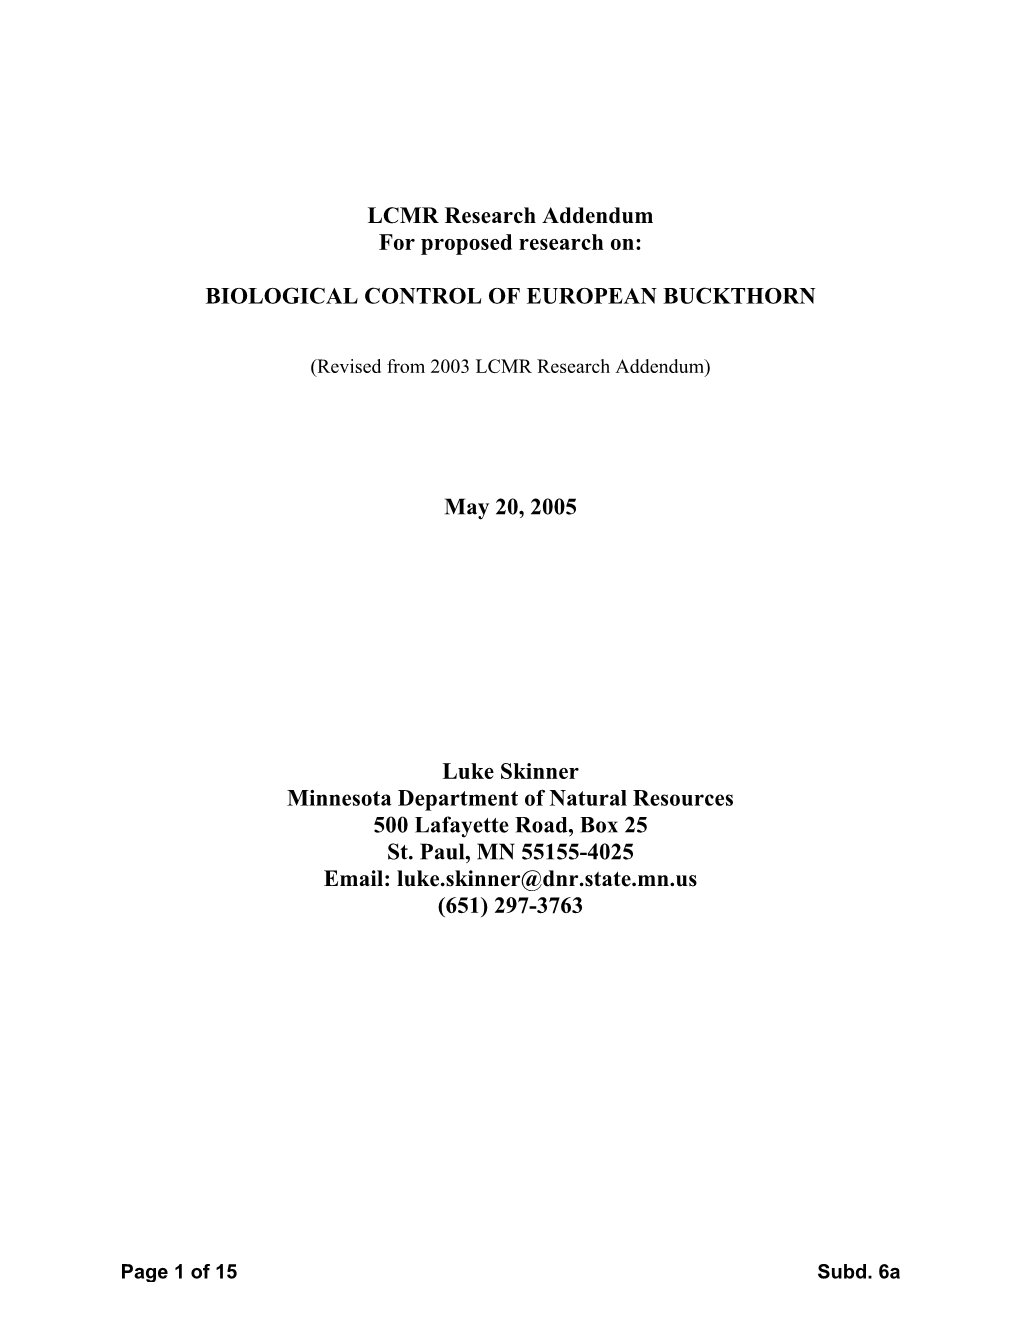 LCMR Research Addendum for Proposed Research On